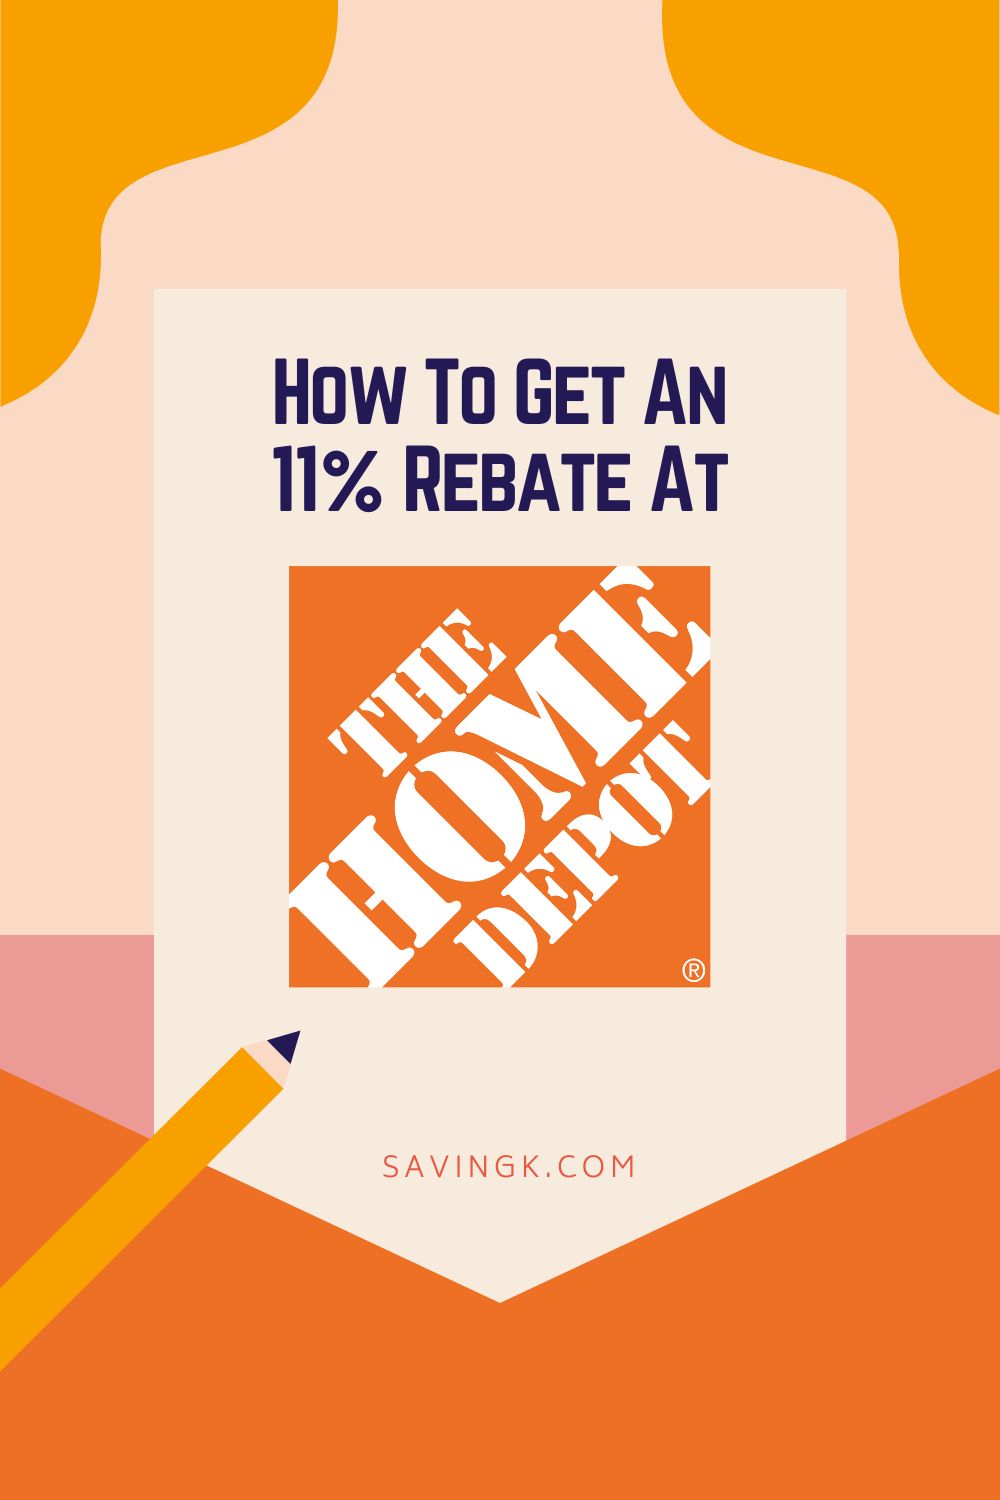 How To Get An 11% Rebate At Home Depot